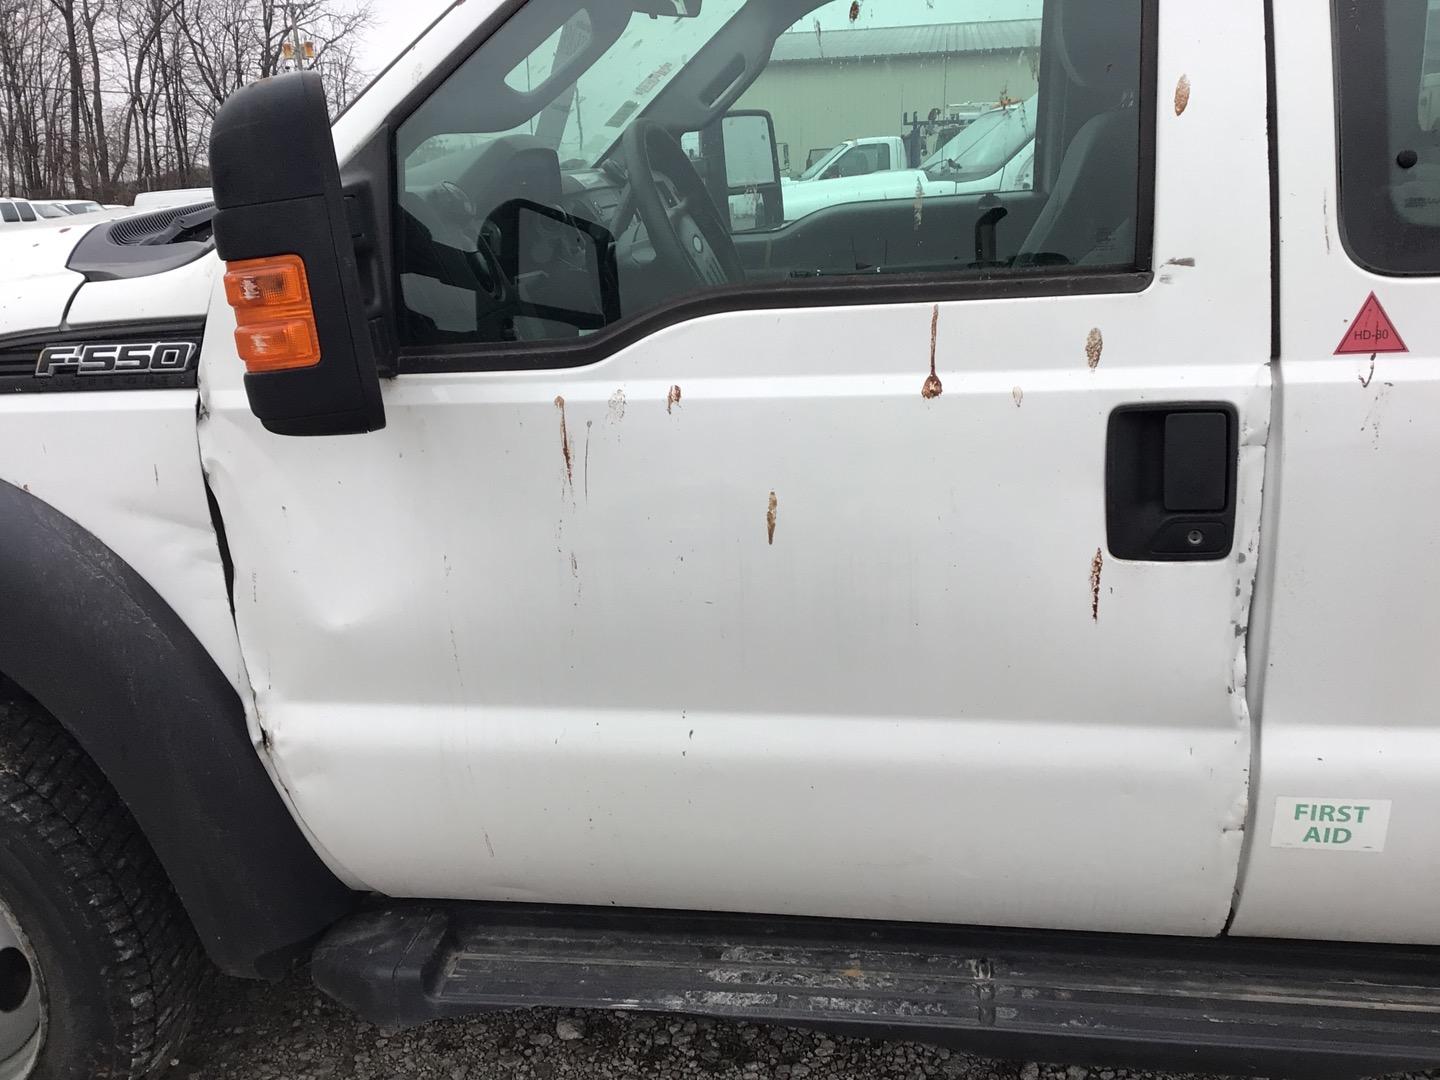 2012 FORD F550 Serial Number: 1FD0X5HY7CEC67478